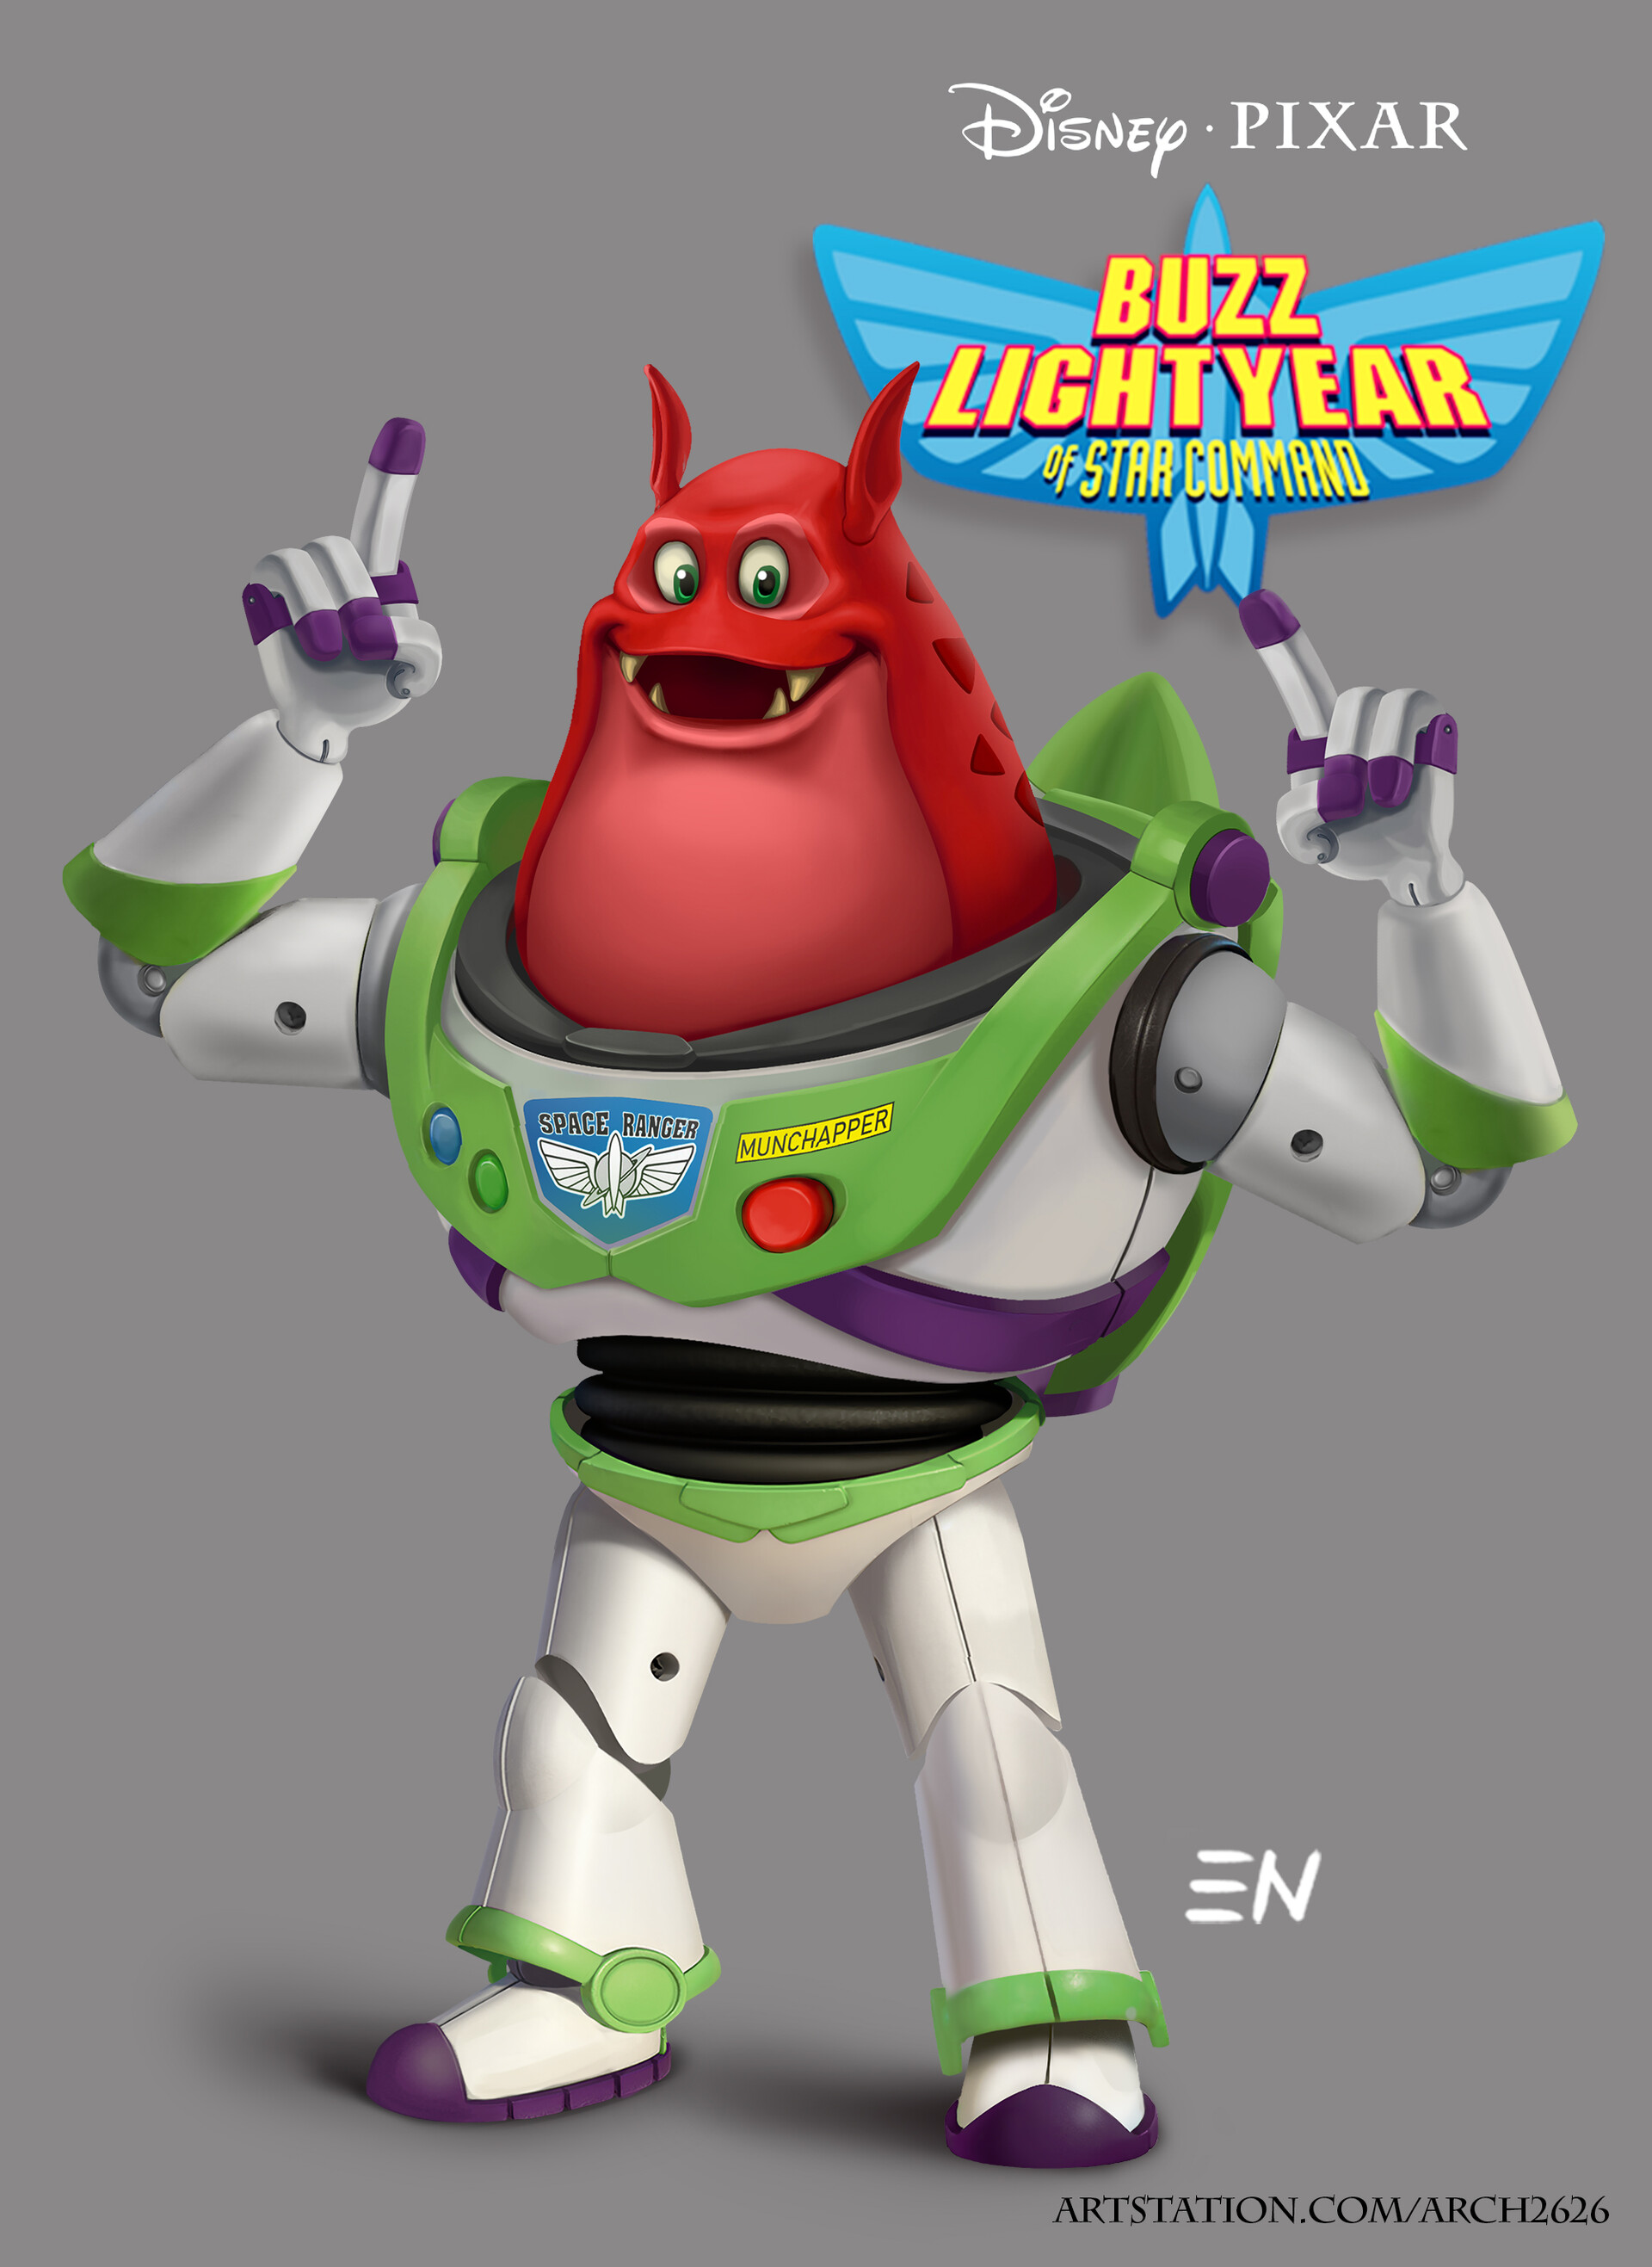 Buzz lightyear of star command booster